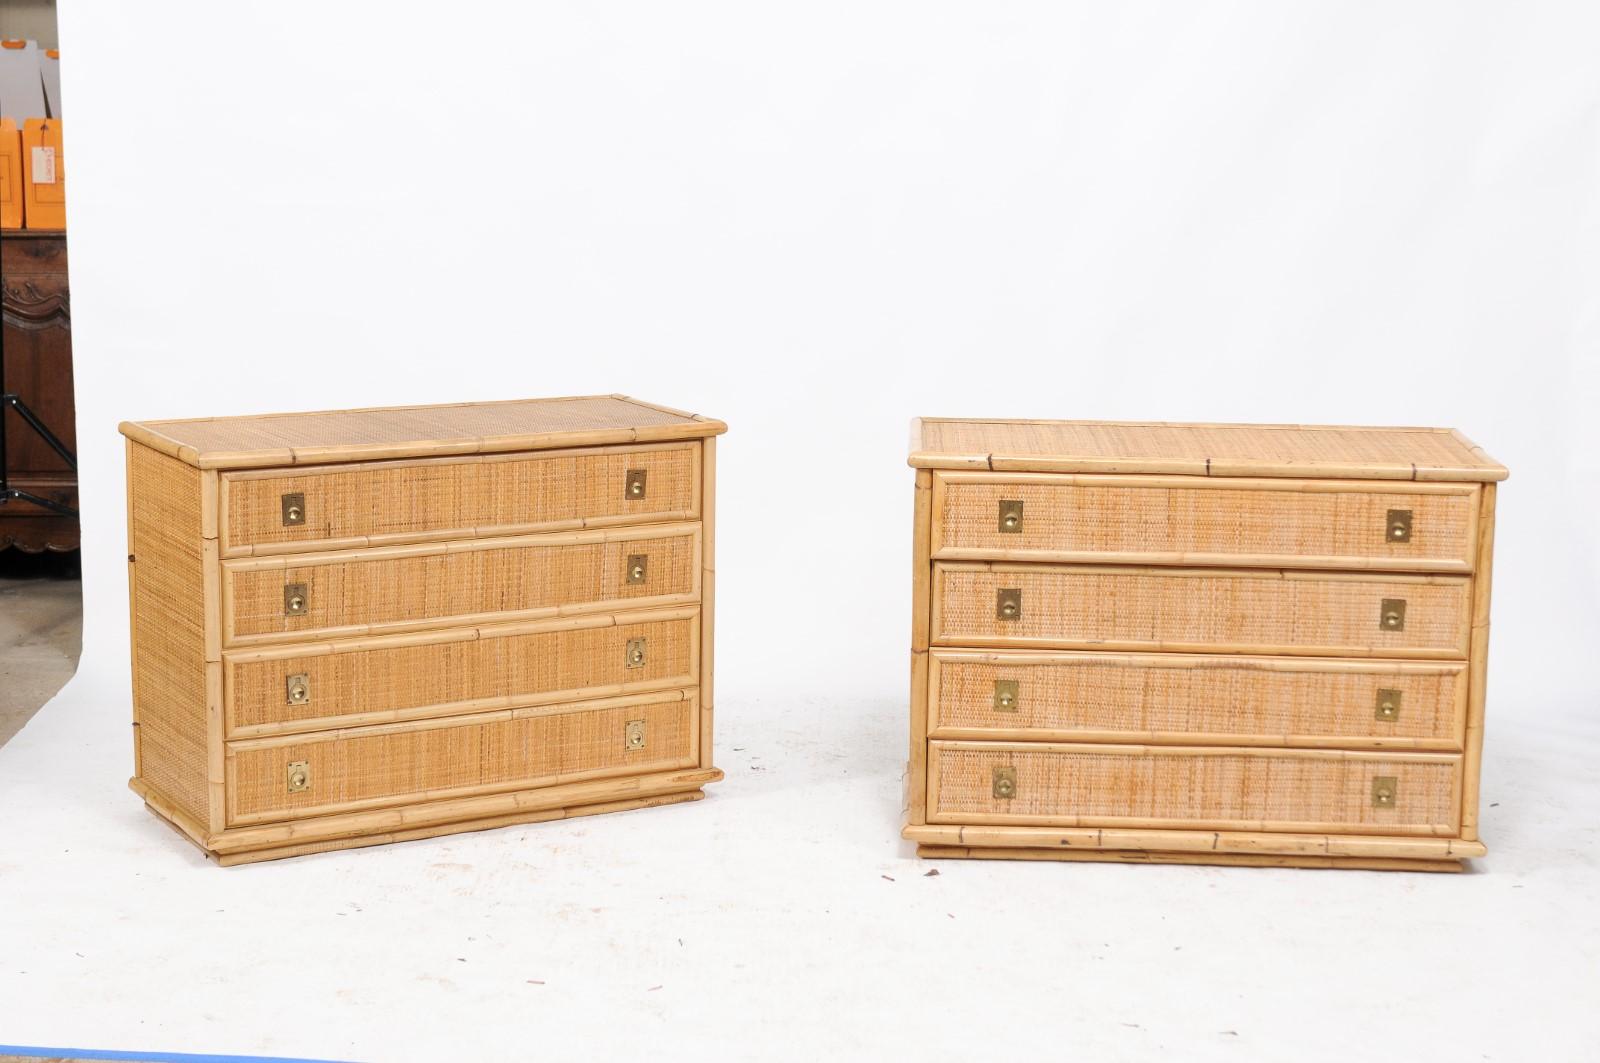 A pair of southern French vintage raffia and bamboo four-drawer commodes from the second half of the 20th century, with brass hardware. We found these vintage commodes in the South of France and immediately thought they’d look fabulous in any one of